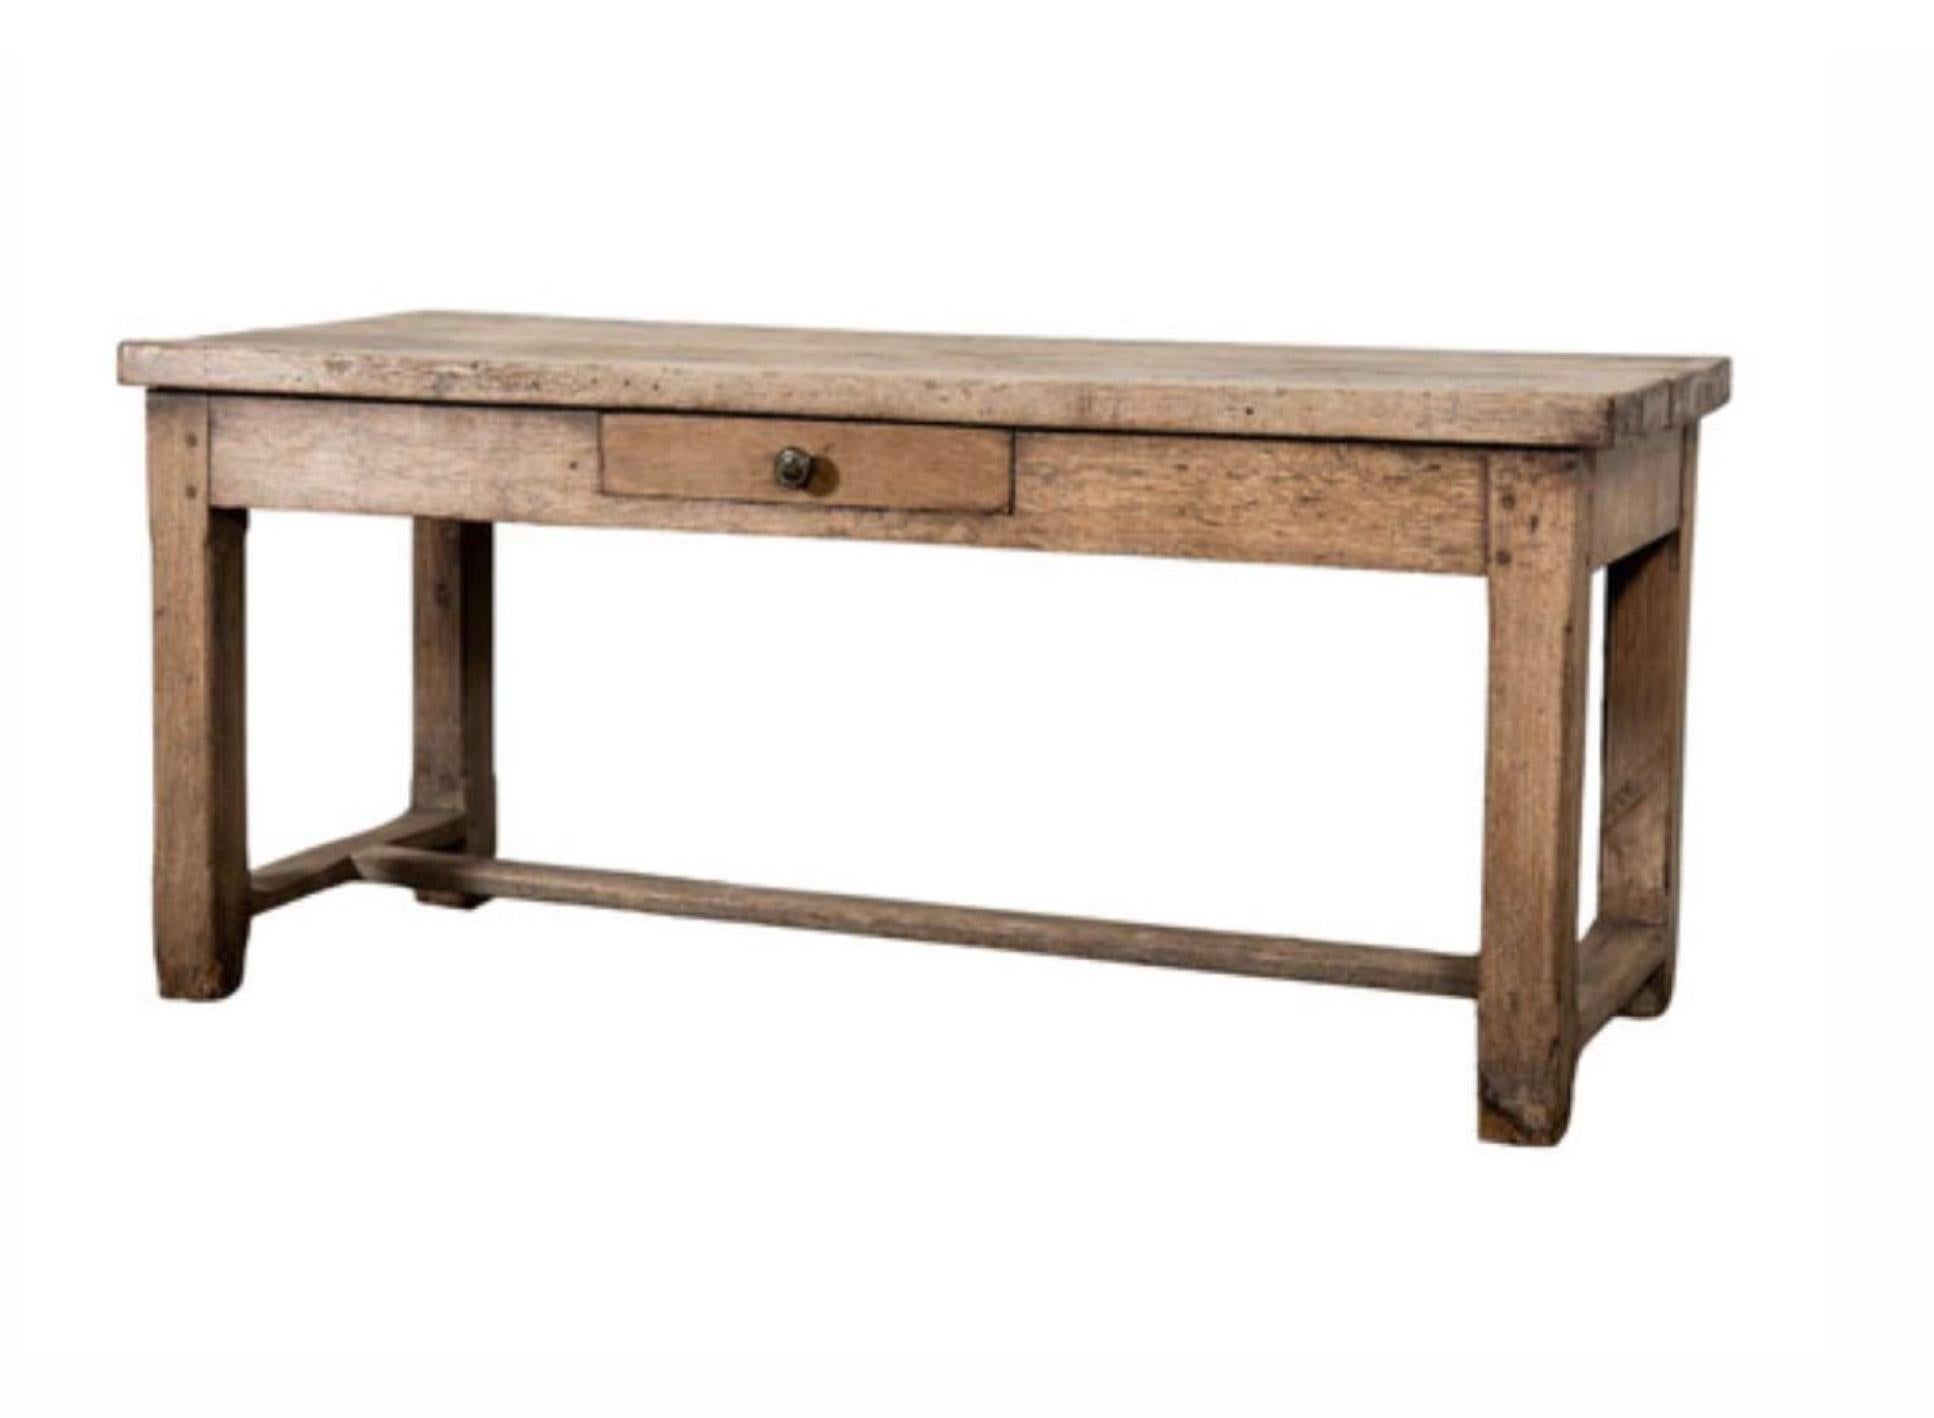 Charming early 1900s French Provincial oak farm table, aged and weathered to perfection. Supported by an H-shaped base, this versatile piece features a convenient single drawer on the front. With its multifunctional design, it can effortlessly serve